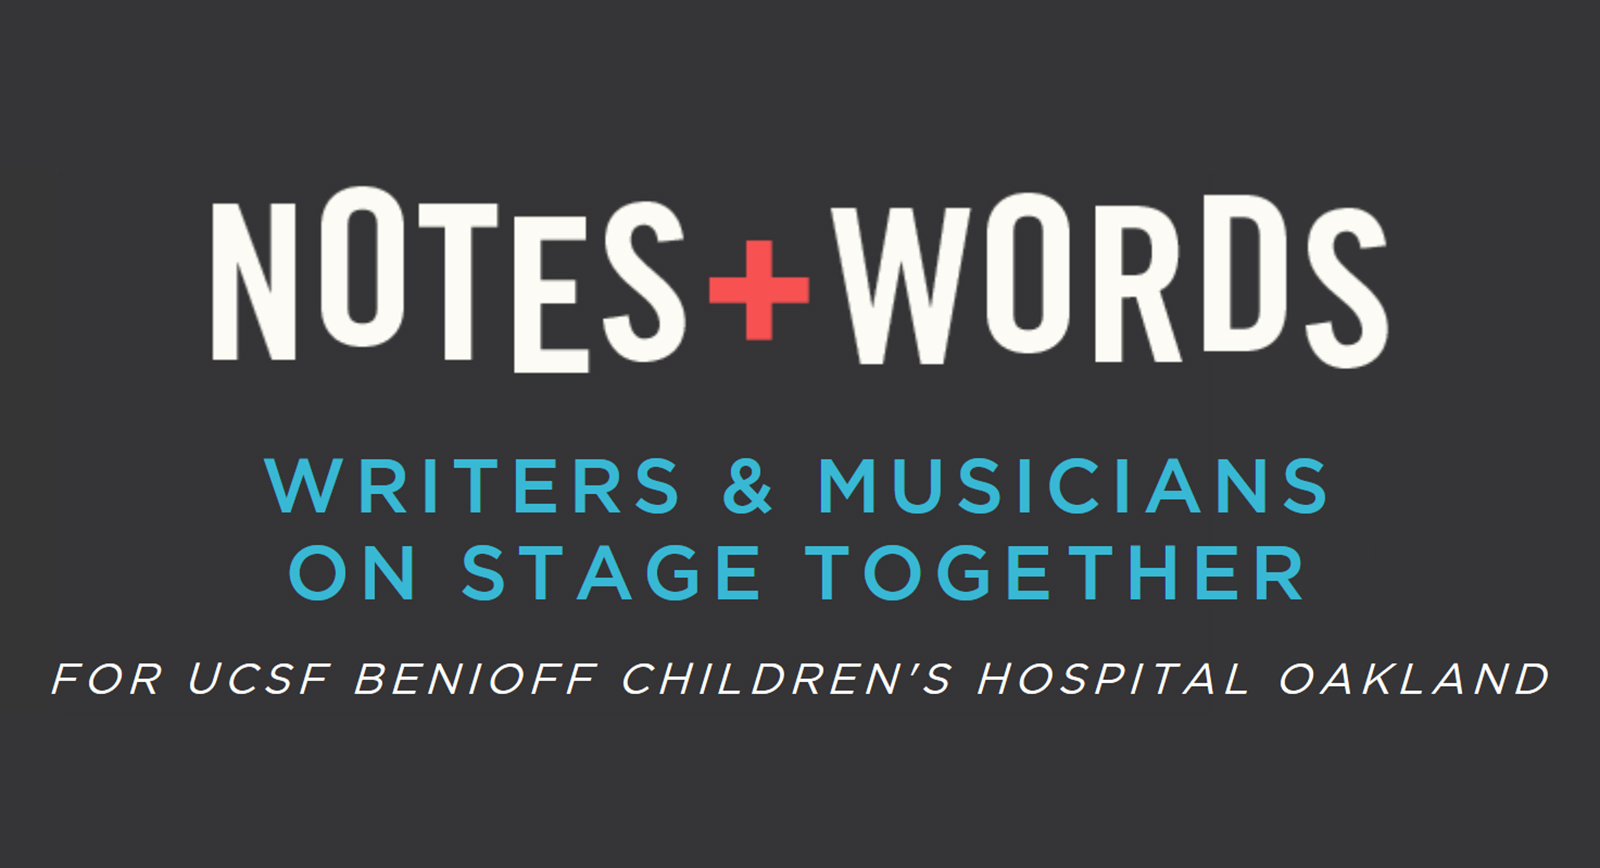 Notes-&-Words-2016-Benefit-For-UCSF-Benioff-Children's-Hospital-Oakland-Fox-Theater-Chris-Martin-Coldplay-Portal-Tickets-FI